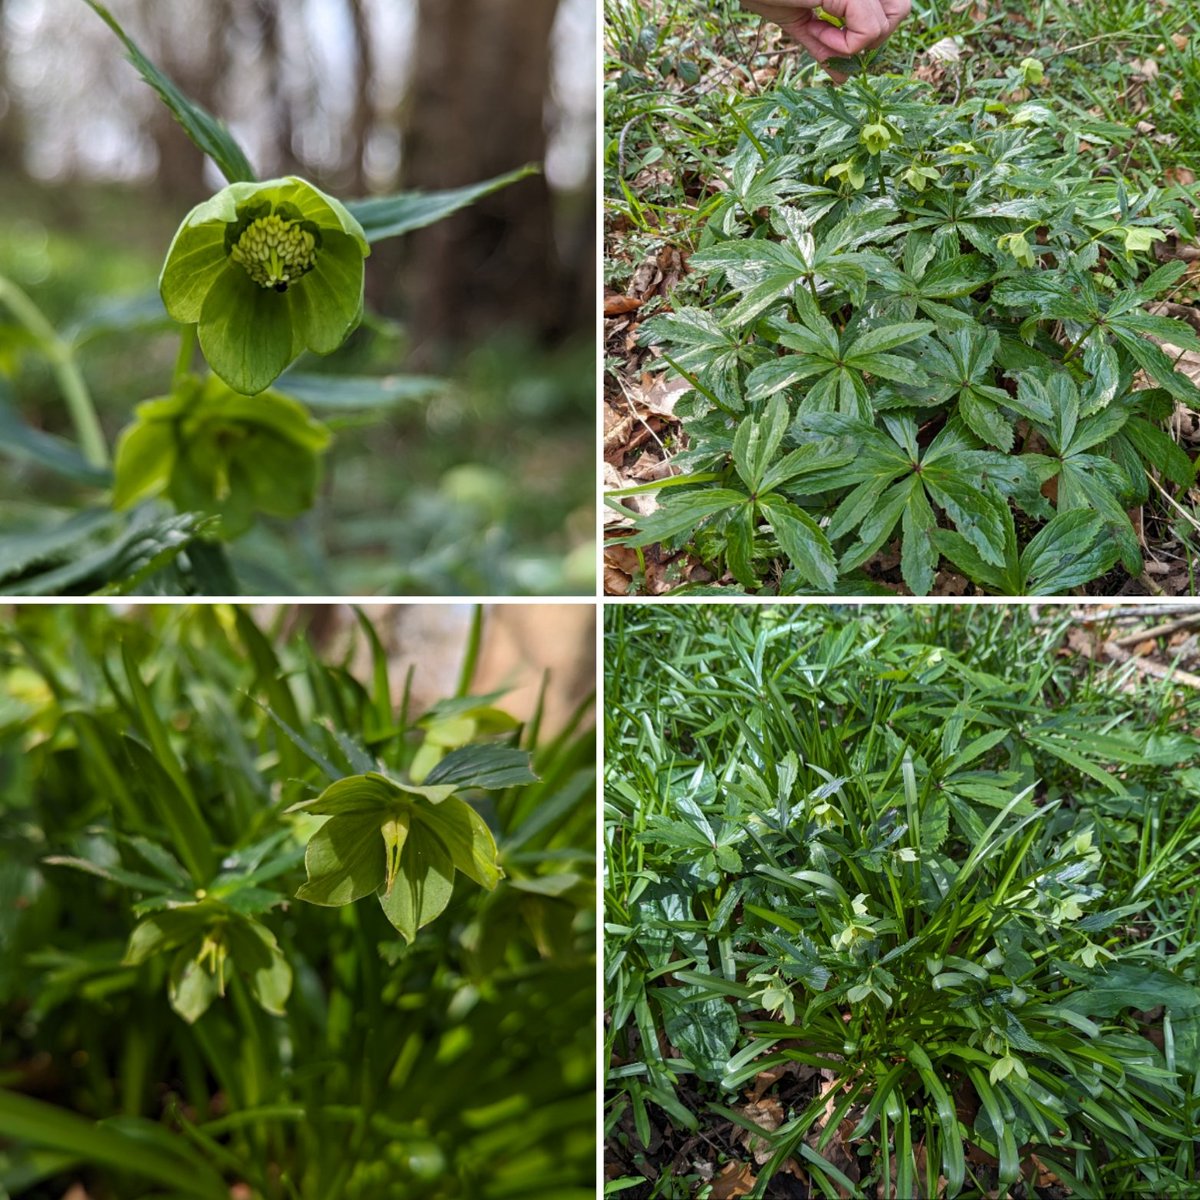 The highlight of today's adventure: my first encounter with Green Hellebore (Helleborus viridis) at its only #Northumberland site. Amazingly, recorded on and off since the 1500's 🤯🌱.